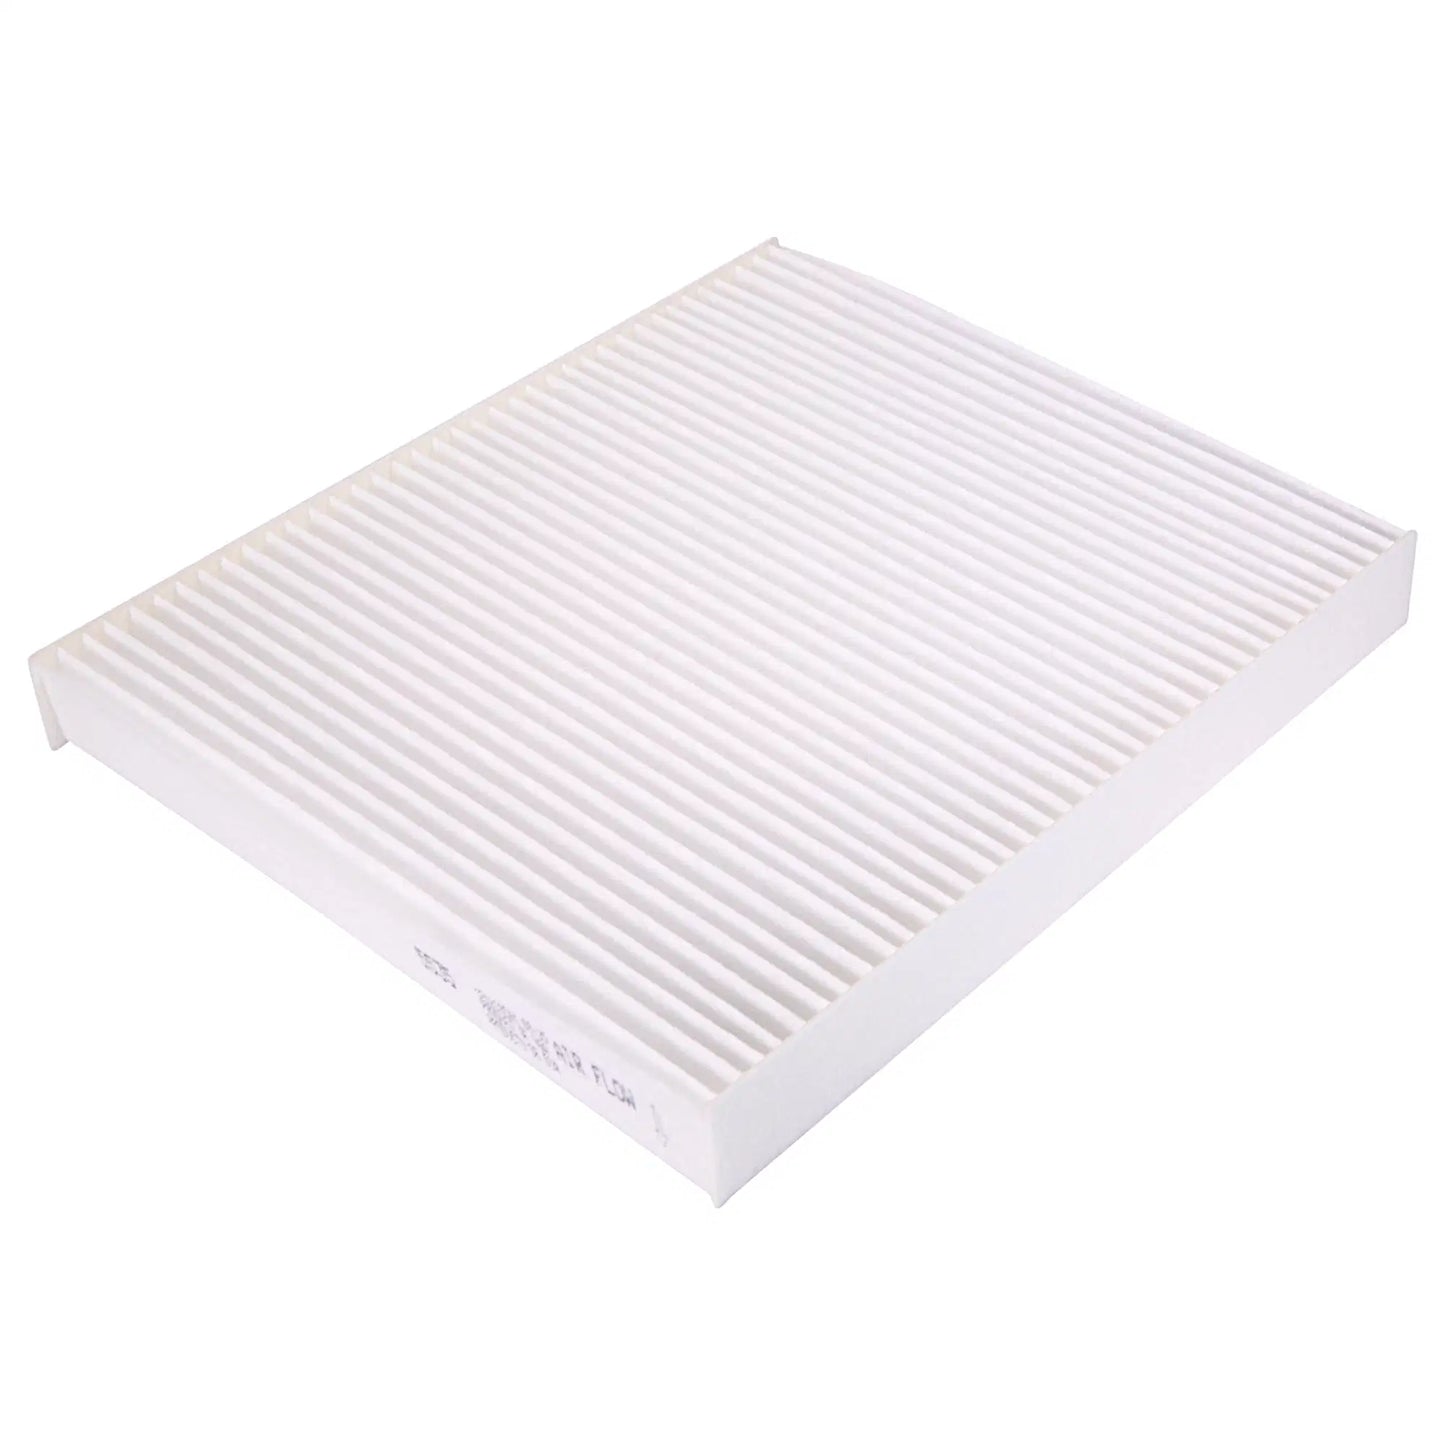 SuperTech Cabin Air Filter 5535, Replacement Air/Dust Filter for Buick, Cadillac, Chevrolet, GMC